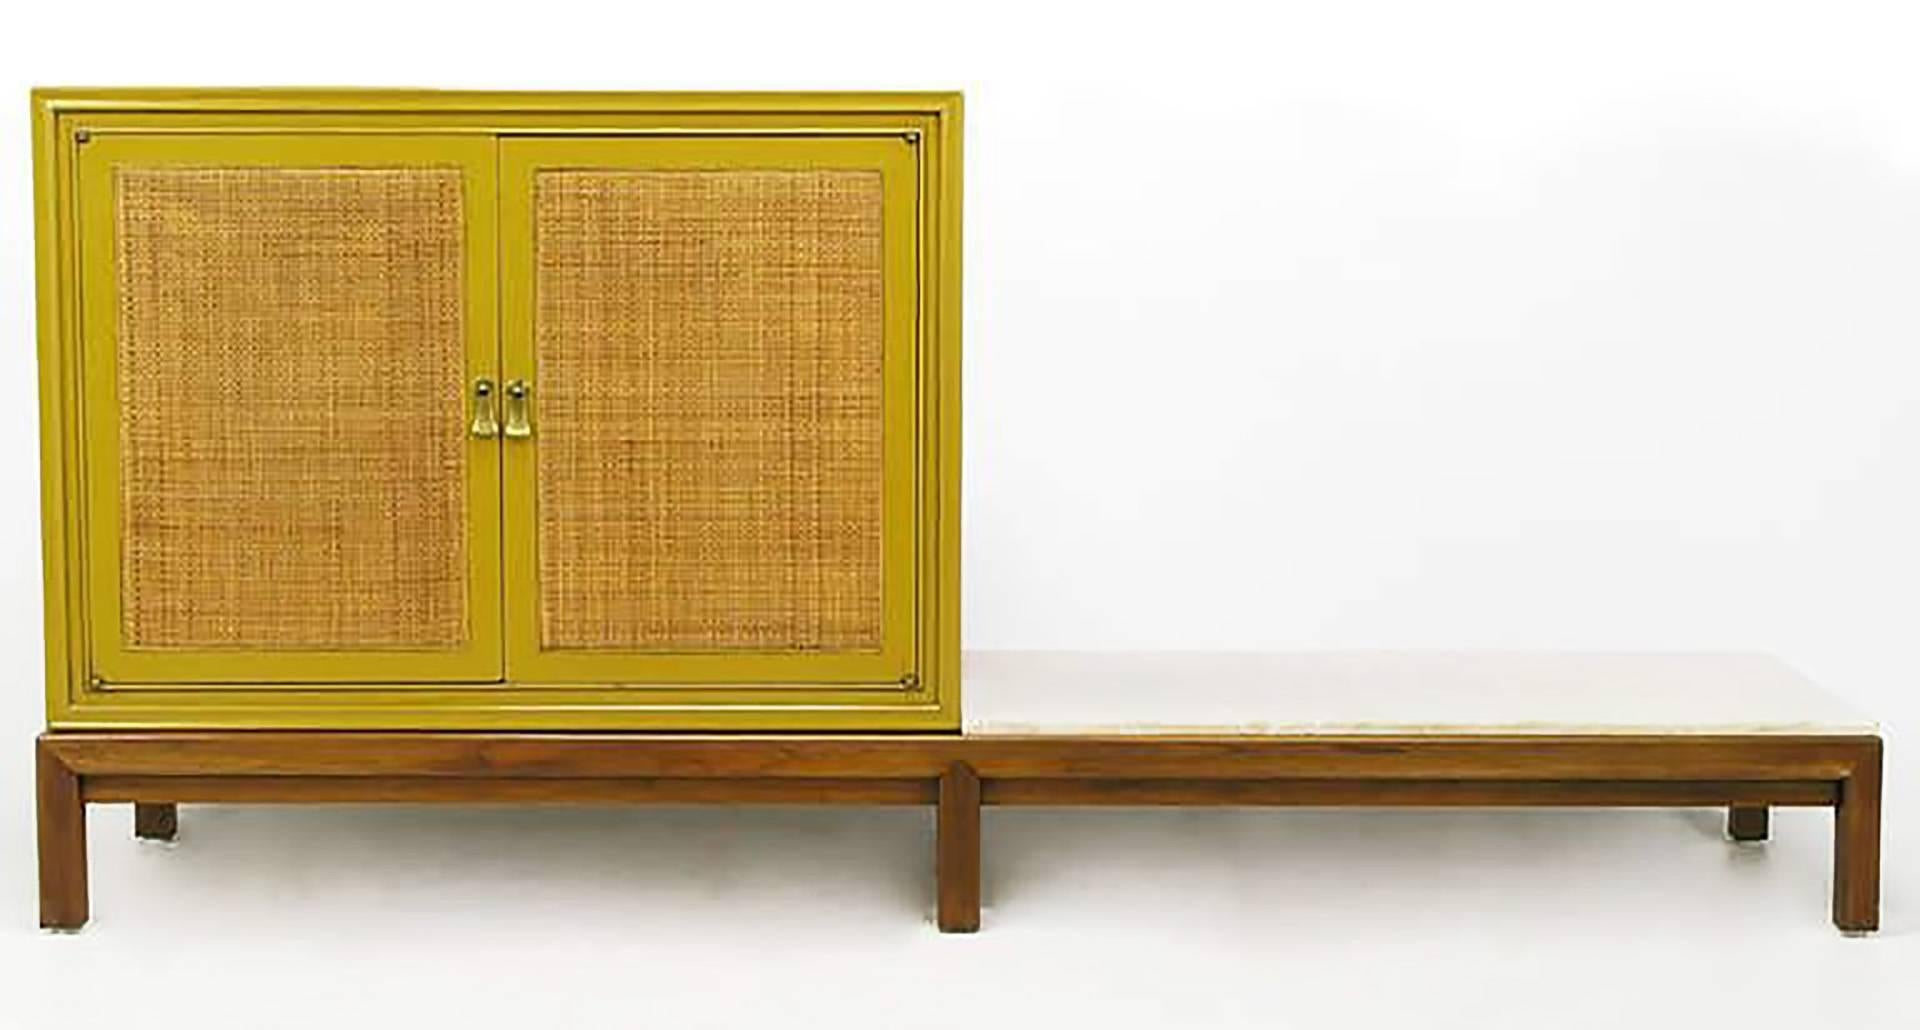 Single saffron yellow craquelure lacquered cabinet with cane-front doors. Walnut six-leg base, with contiguous marble platform for placement of sculpture, plant, or cushions. From Mount Airy Furniture Company of North Carolina, a quality furniture